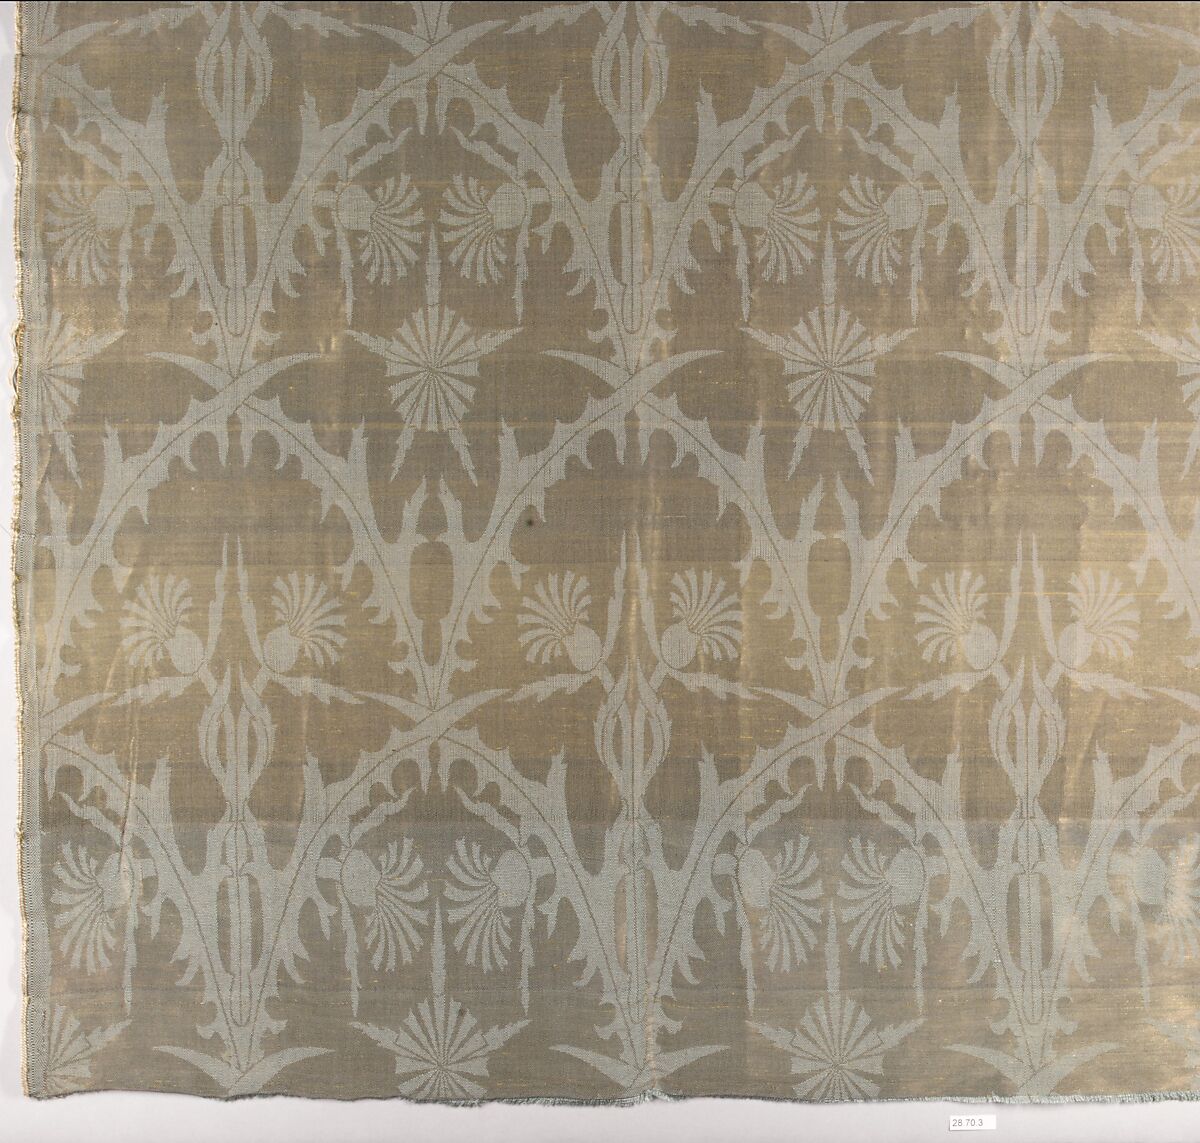 Thistle textile, Designed by Tiffany &amp; Wheeler (1879–1881), Silk and metal threads, damask, woven, American 